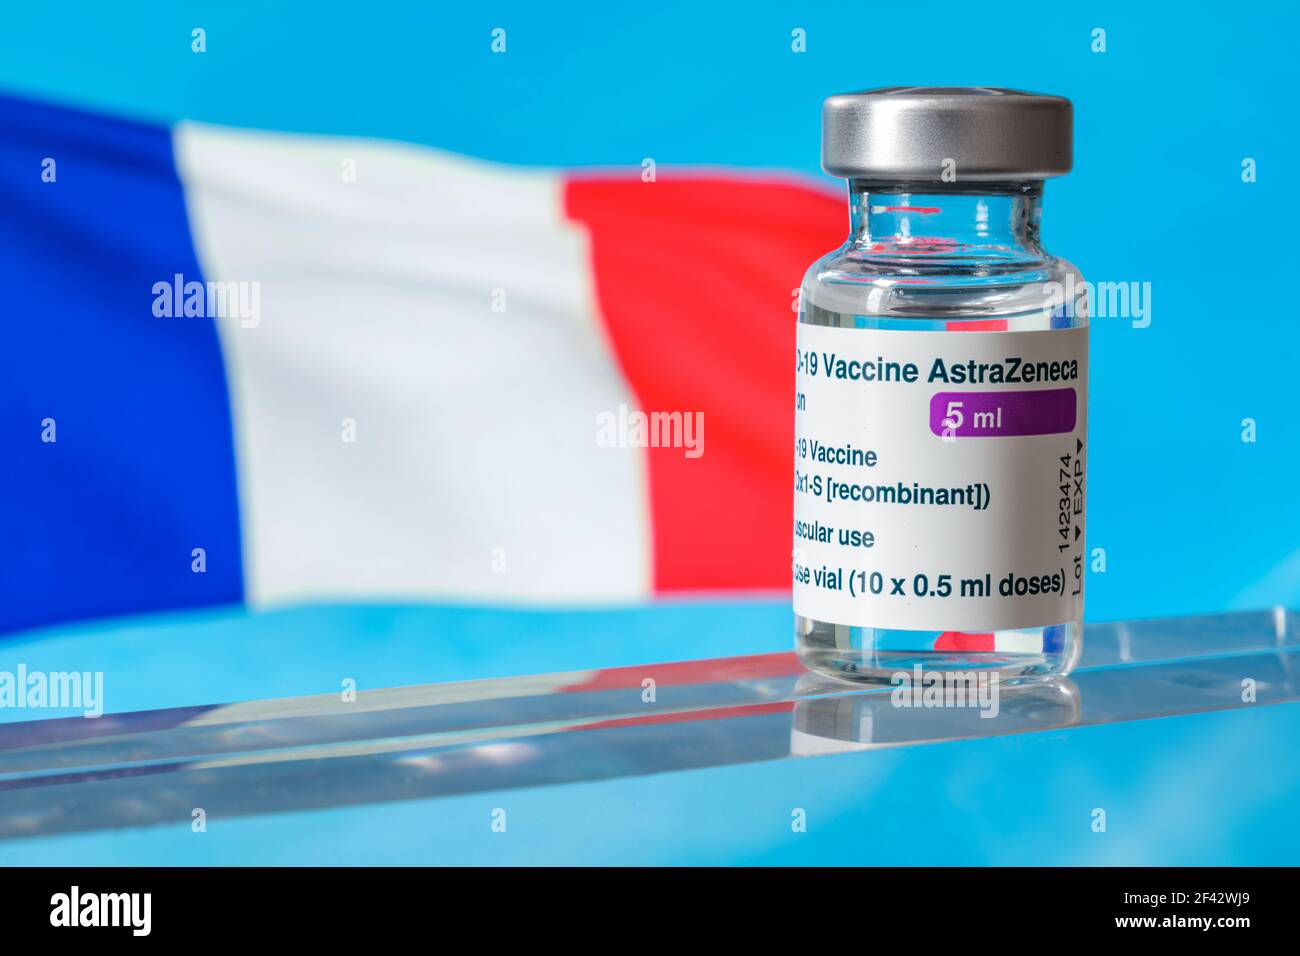 Montreal, CA - 18 March 2021: Vial of Astrazeneca Covid-19 vaccine in front of a France flag Stock Photo